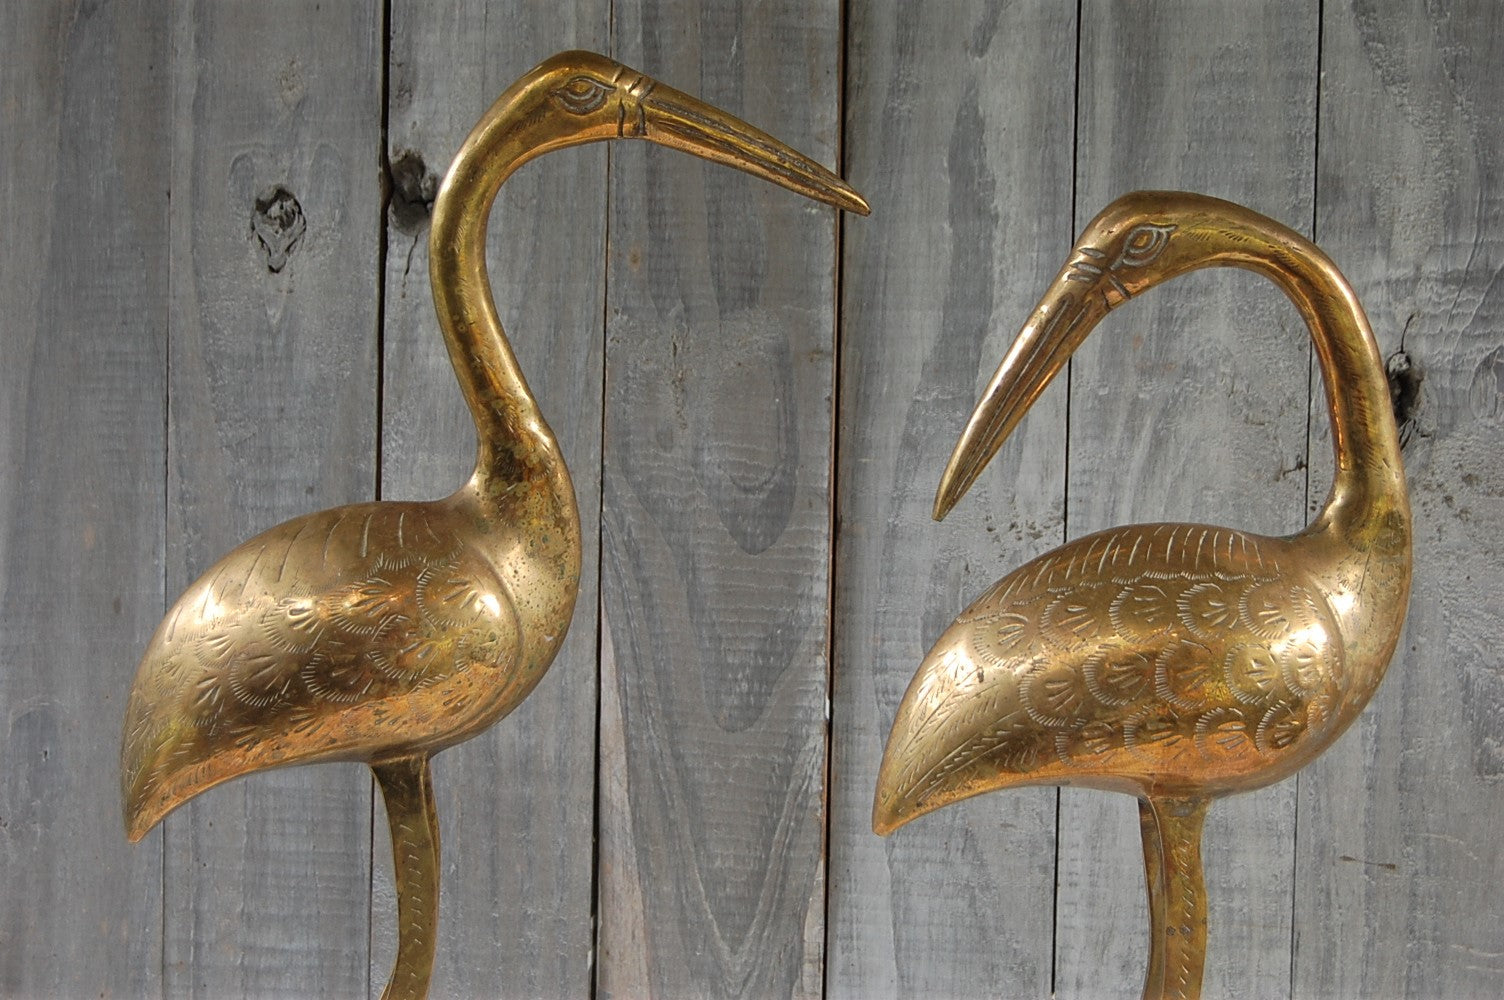 Large brass swan – The Vintage Artistry